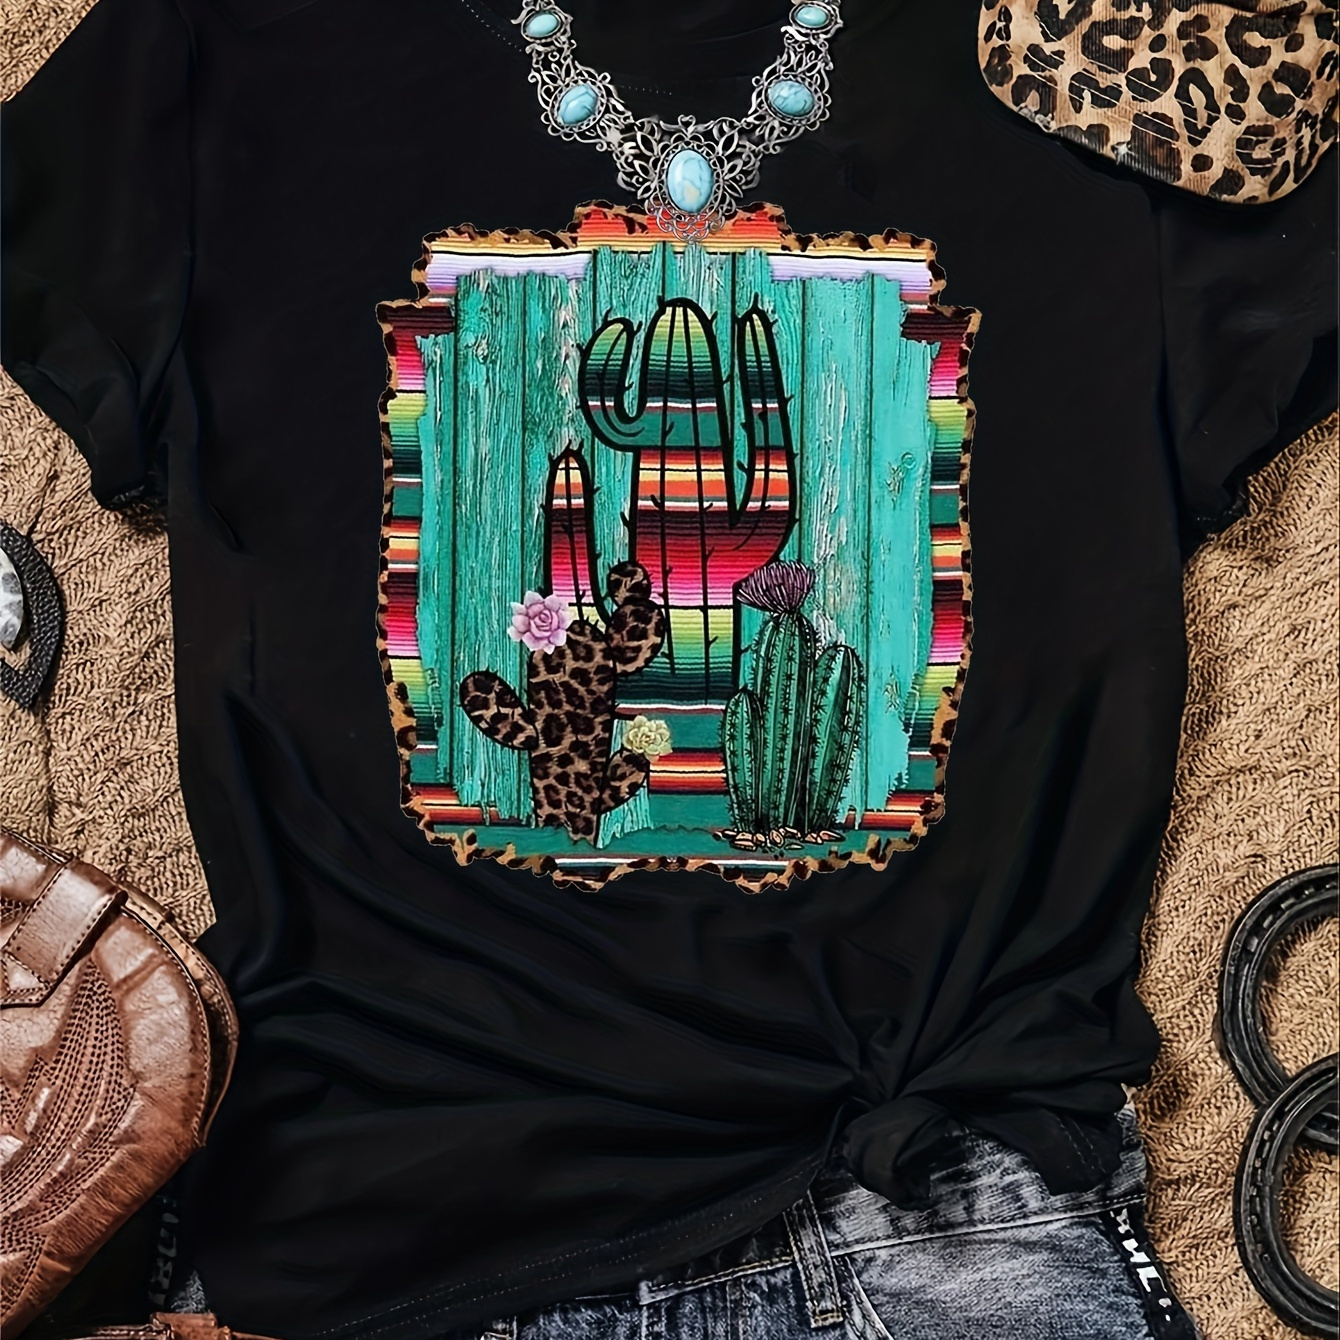 

Cactus Print Crew Neck T-shirt, Casual Short Sleeve T-shirt For Spring & Summer, Women's Clothing